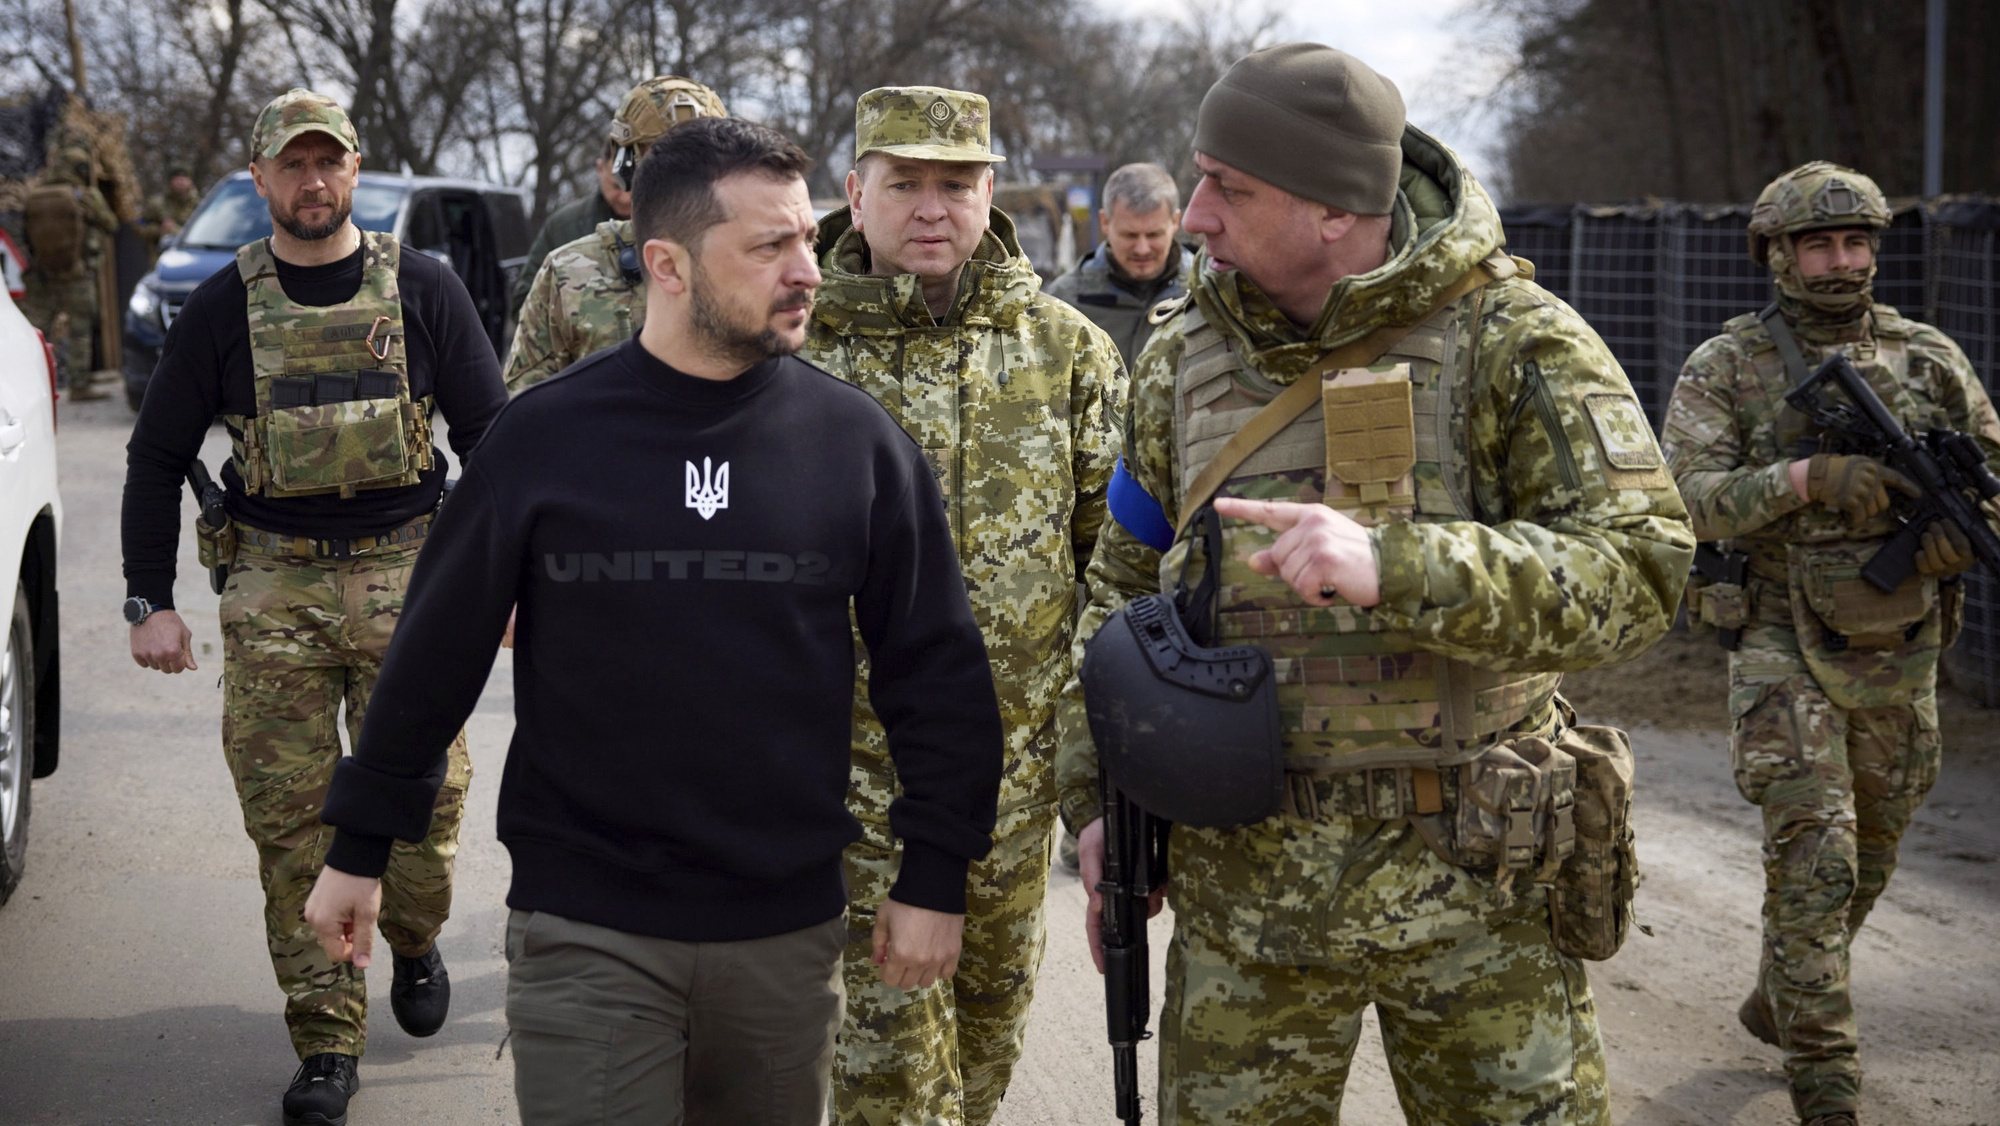 epa10547201 A handout photo made available by the Ukrainian Presidential Press Service shows Ukrainian President Volodymyr Zelensky (L) walking at an undisclosed position of Ukrainian frontier guards in the Sumy area, Ukraine, 28 March 2023. Zelensky inspected the units of the State Border Guard Service during his working visit to the border area with Russia. Russian troops on 24 February 2022, entered Ukrainian territory, starting a conflict that has provoked destruction and a humanitarian crisis.  EPA/PRESIDENTIAL PRESS SERVICE HANDOUT  HANDOUT EDITORIAL USE ONLY/NO SALES